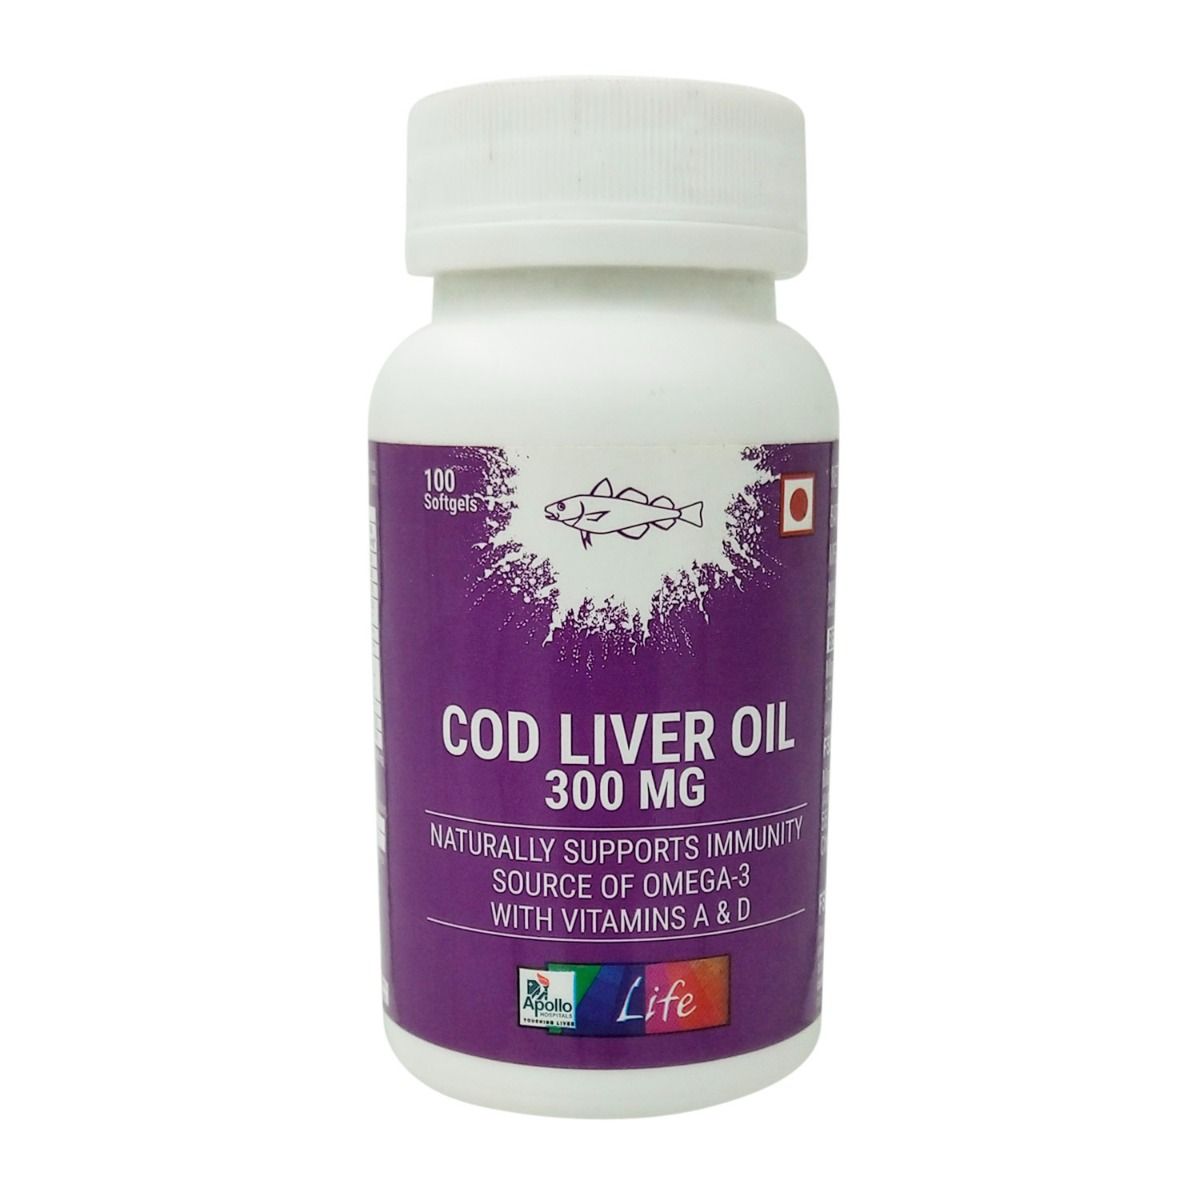 Apollo Life Cod Liver Oil 300 mg, 100 Capsules, Pack of 1 